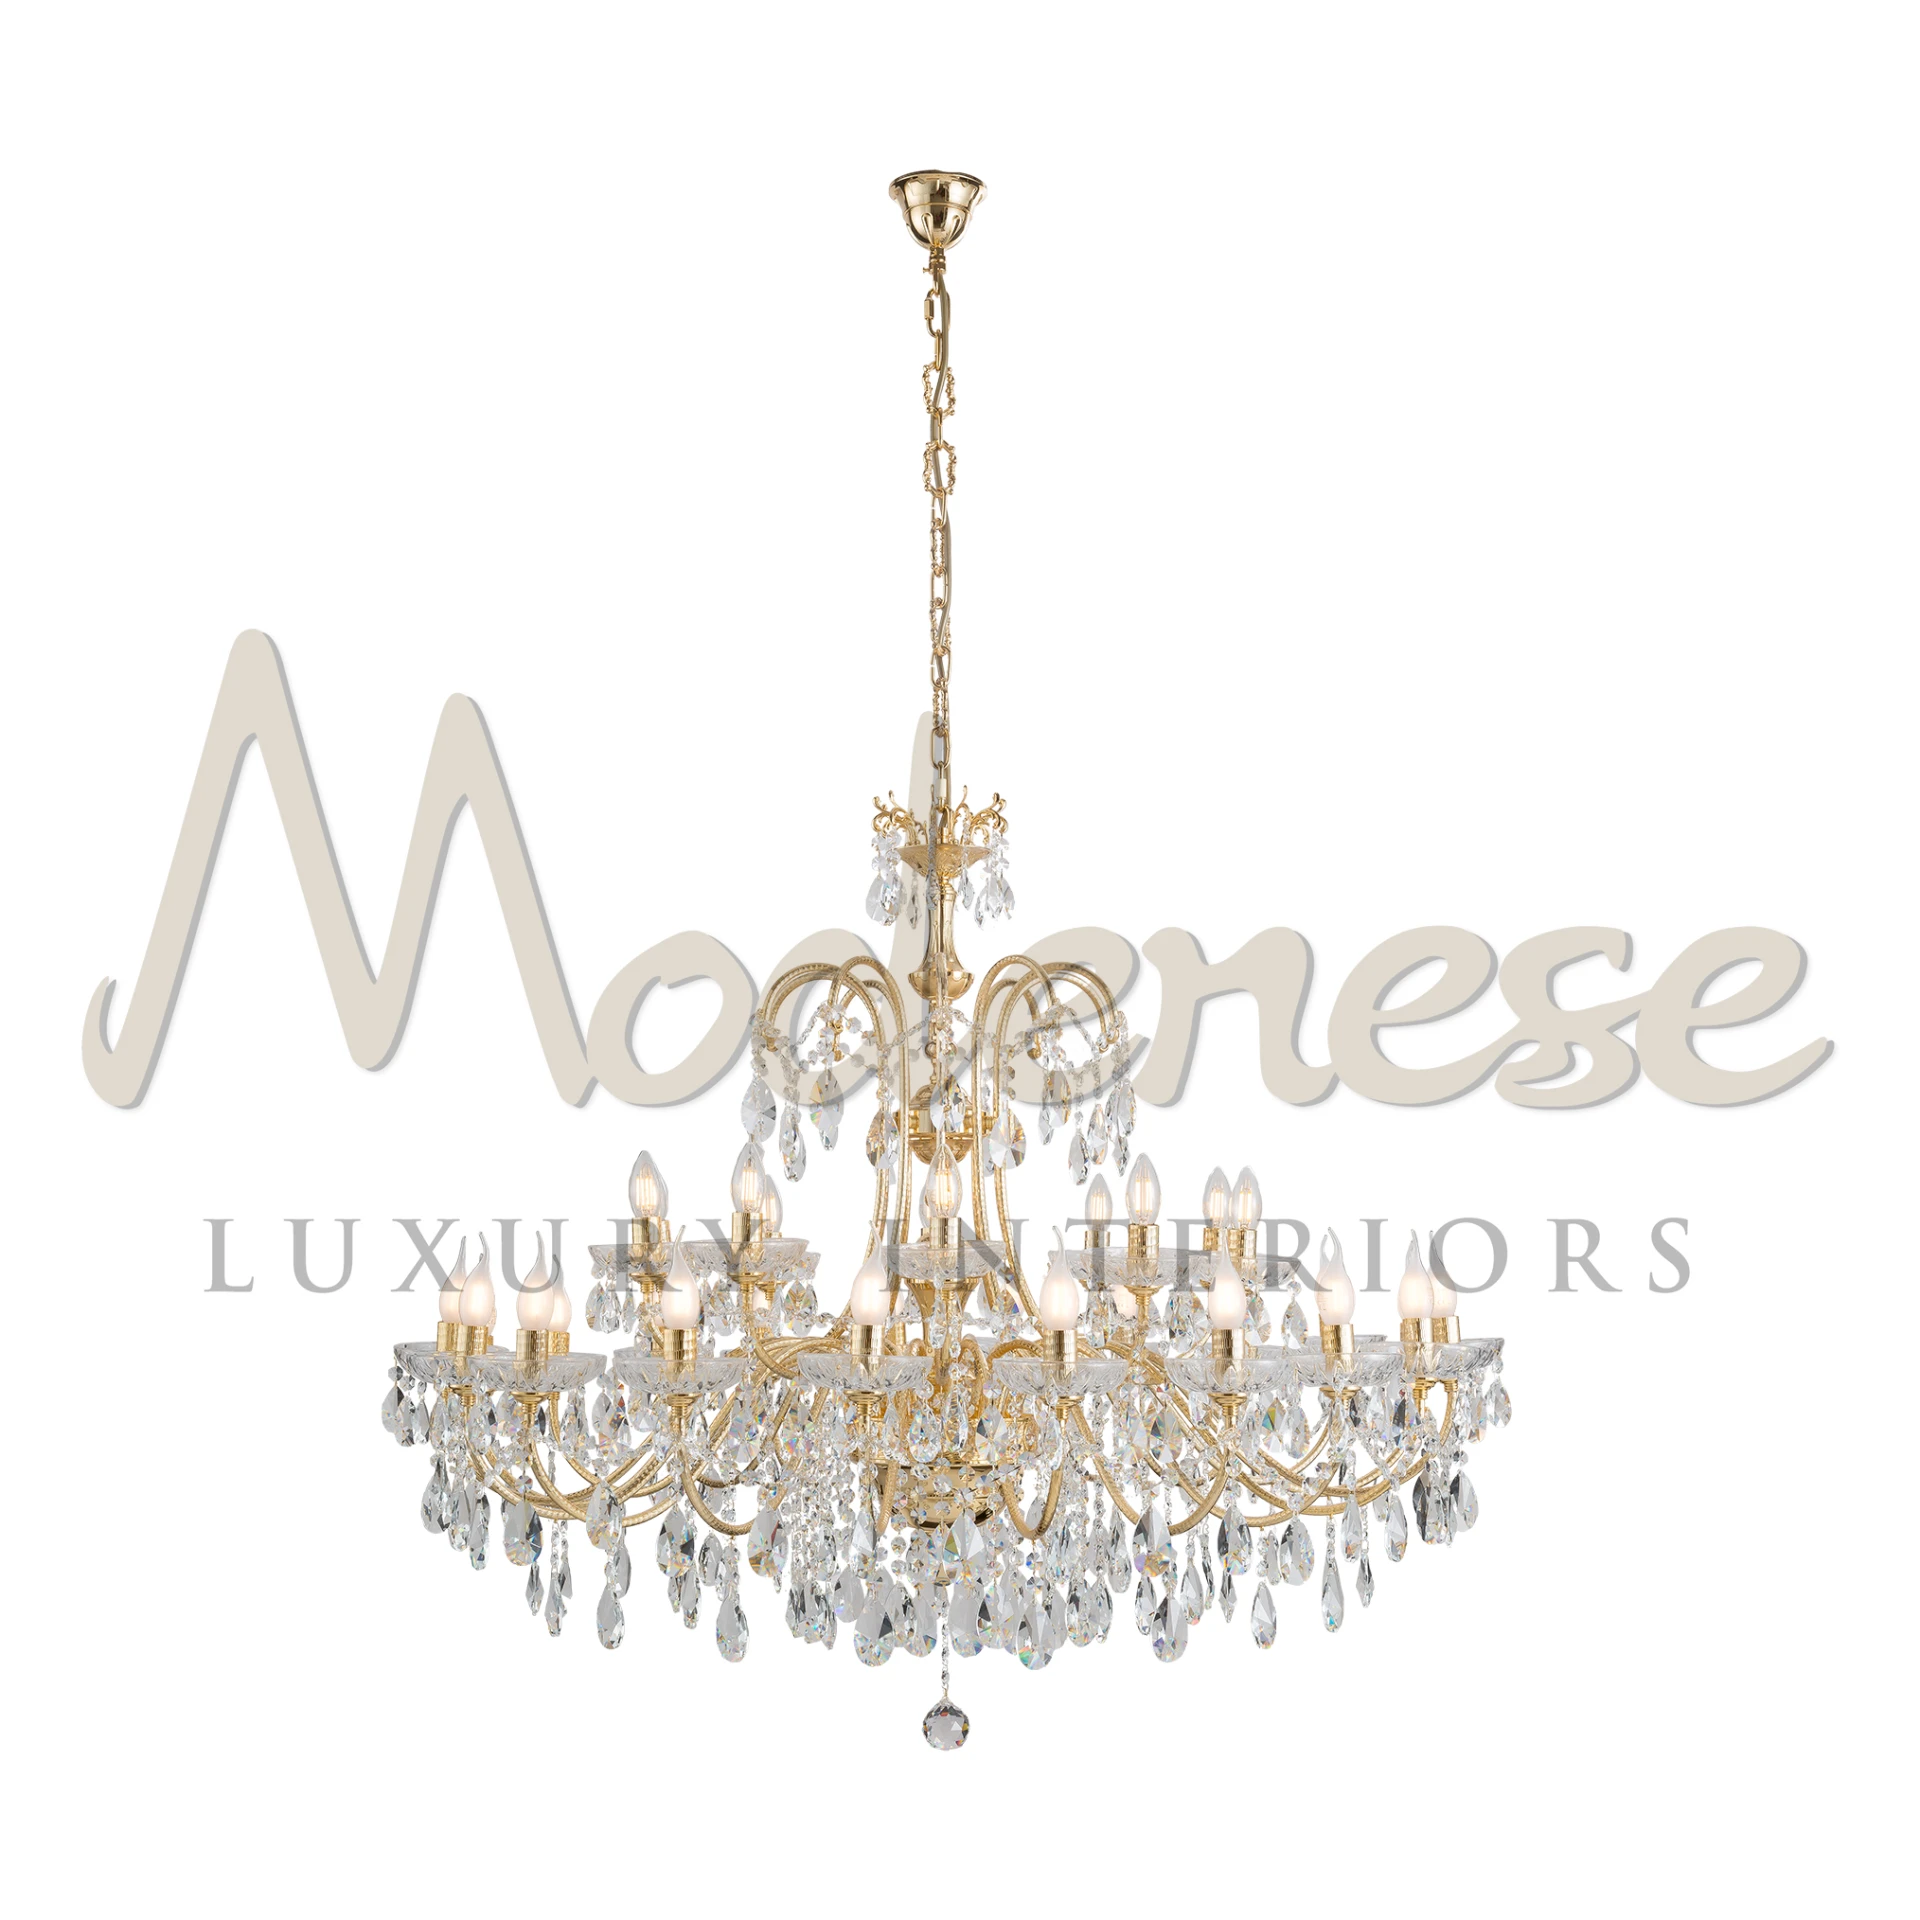 The 'Royal Opulence luxury Chandelier' by Modenese, with gold accents and cascading crystals.